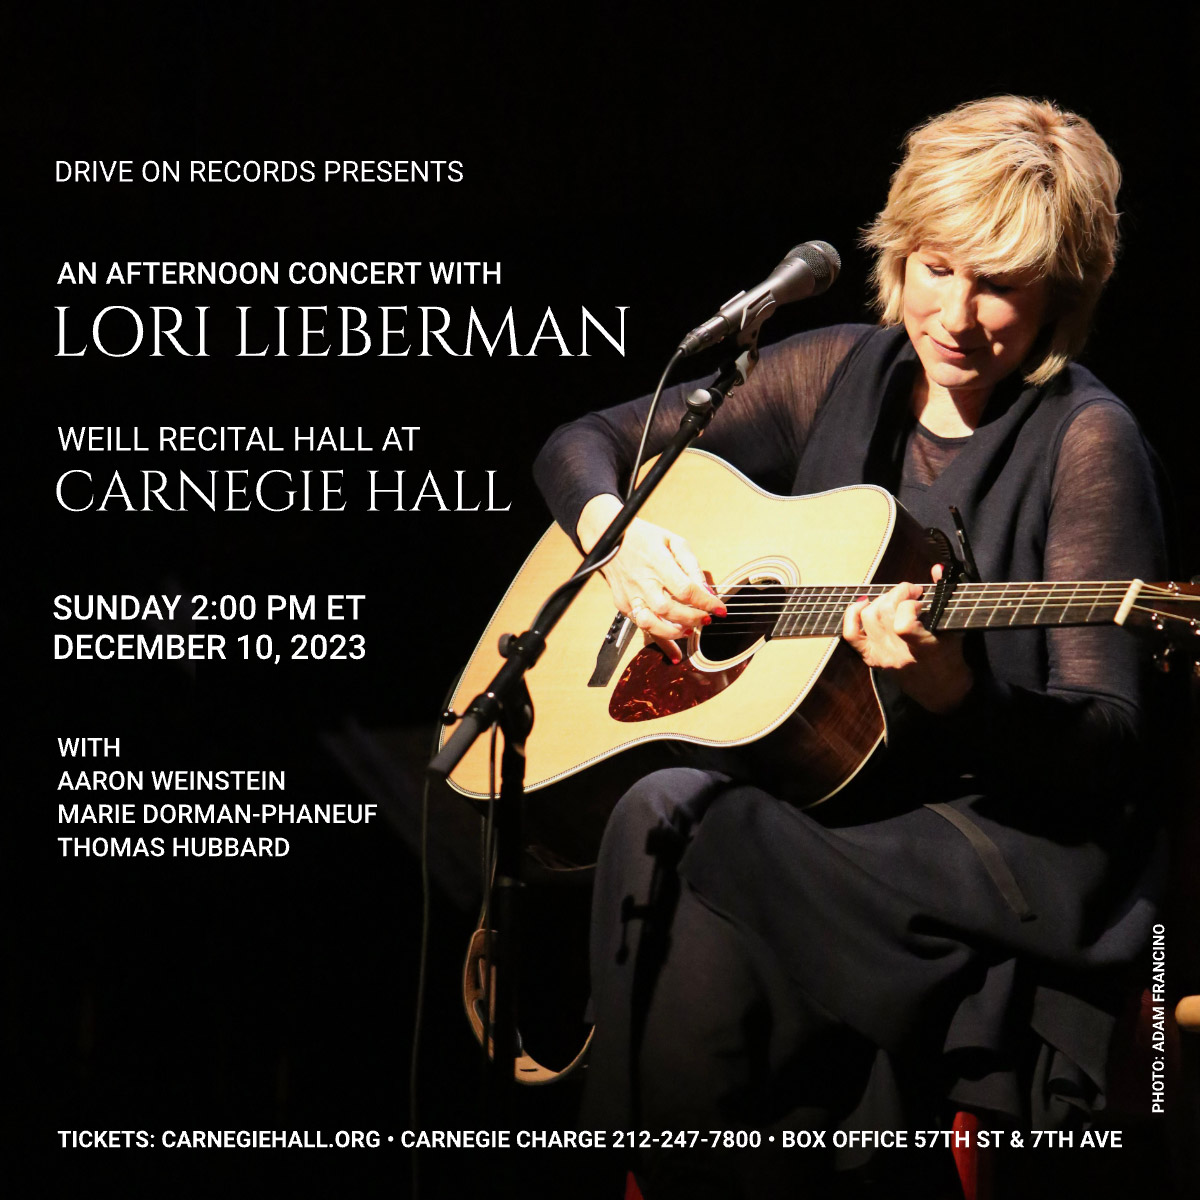 An Afternoon with Lori Lieberman at Carnegie Hall